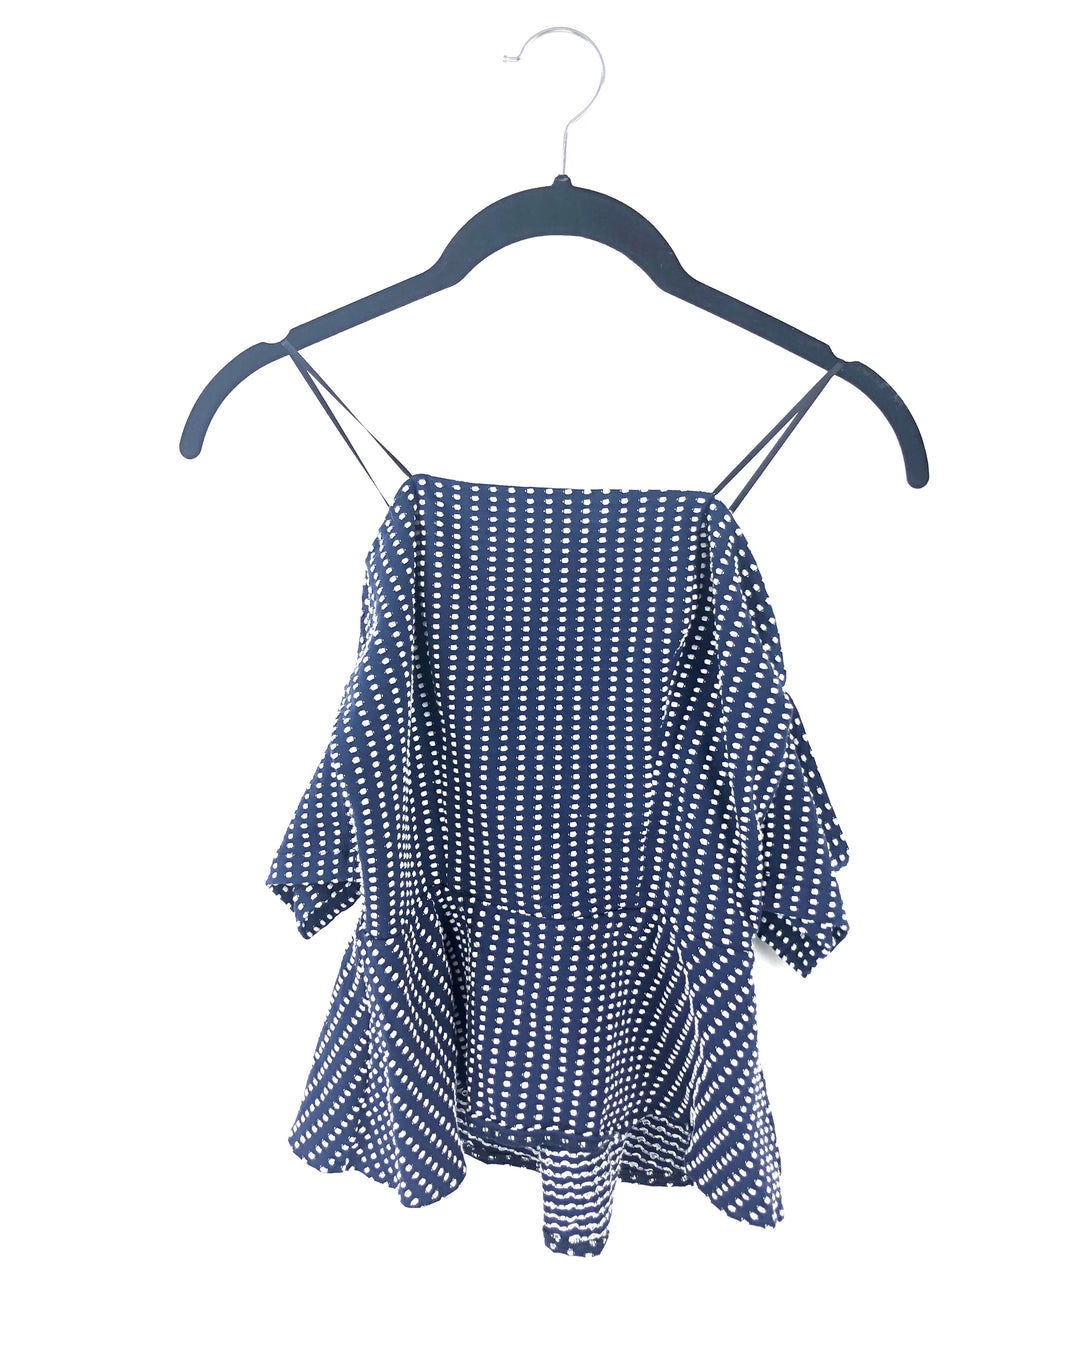 Off The Shoulder Blue And White Polka Dot Peplum Top - Small